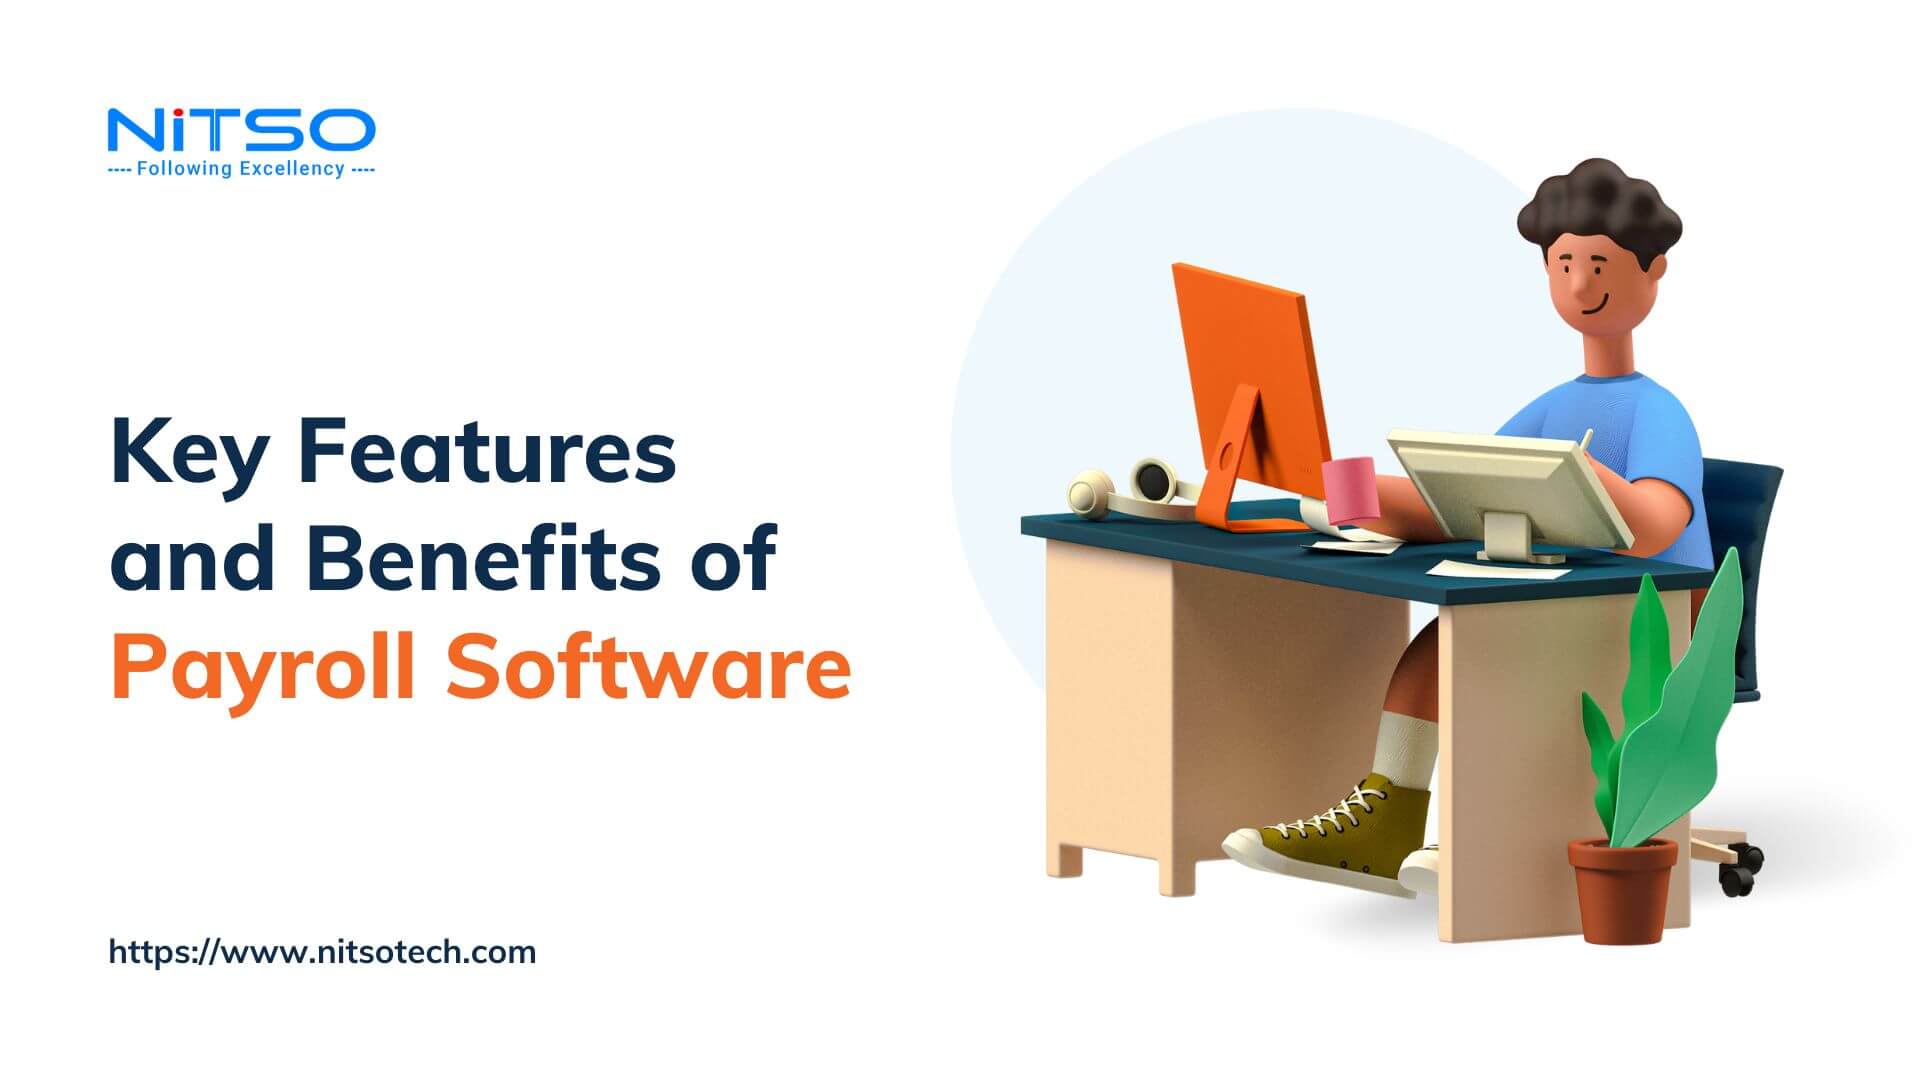 What Are The Key Features and Benefits of Payroll Software?